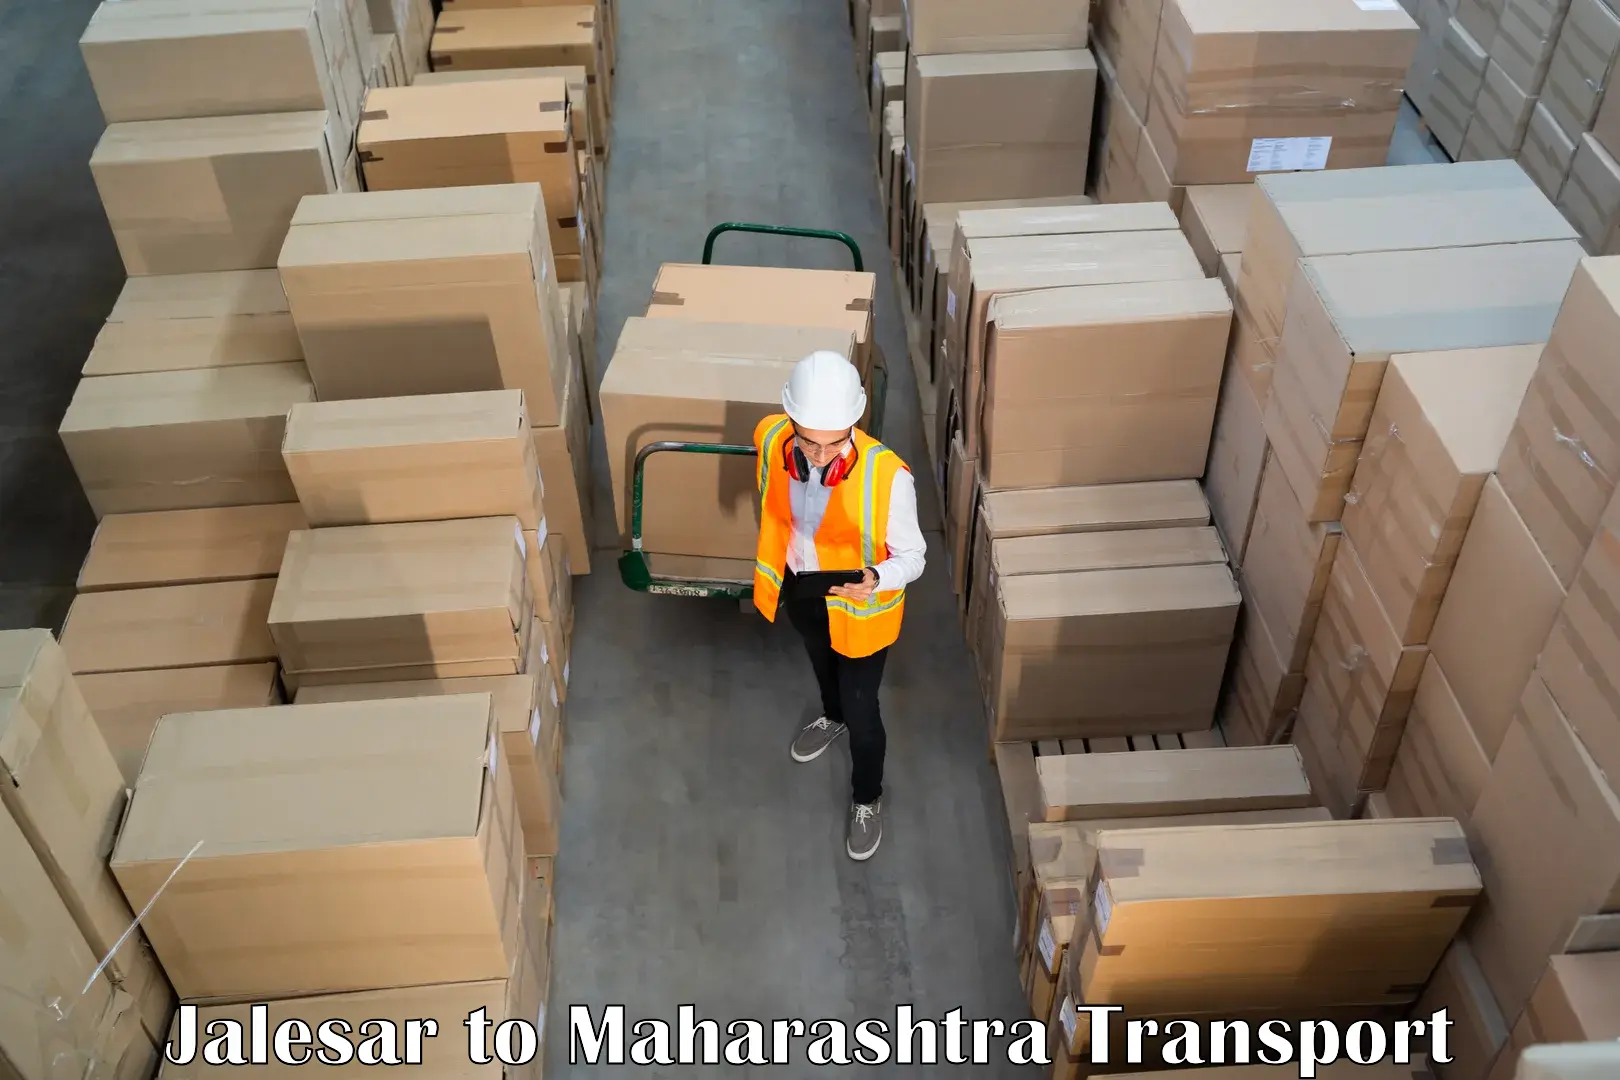 Truck transport companies in India Jalesar to Alephata